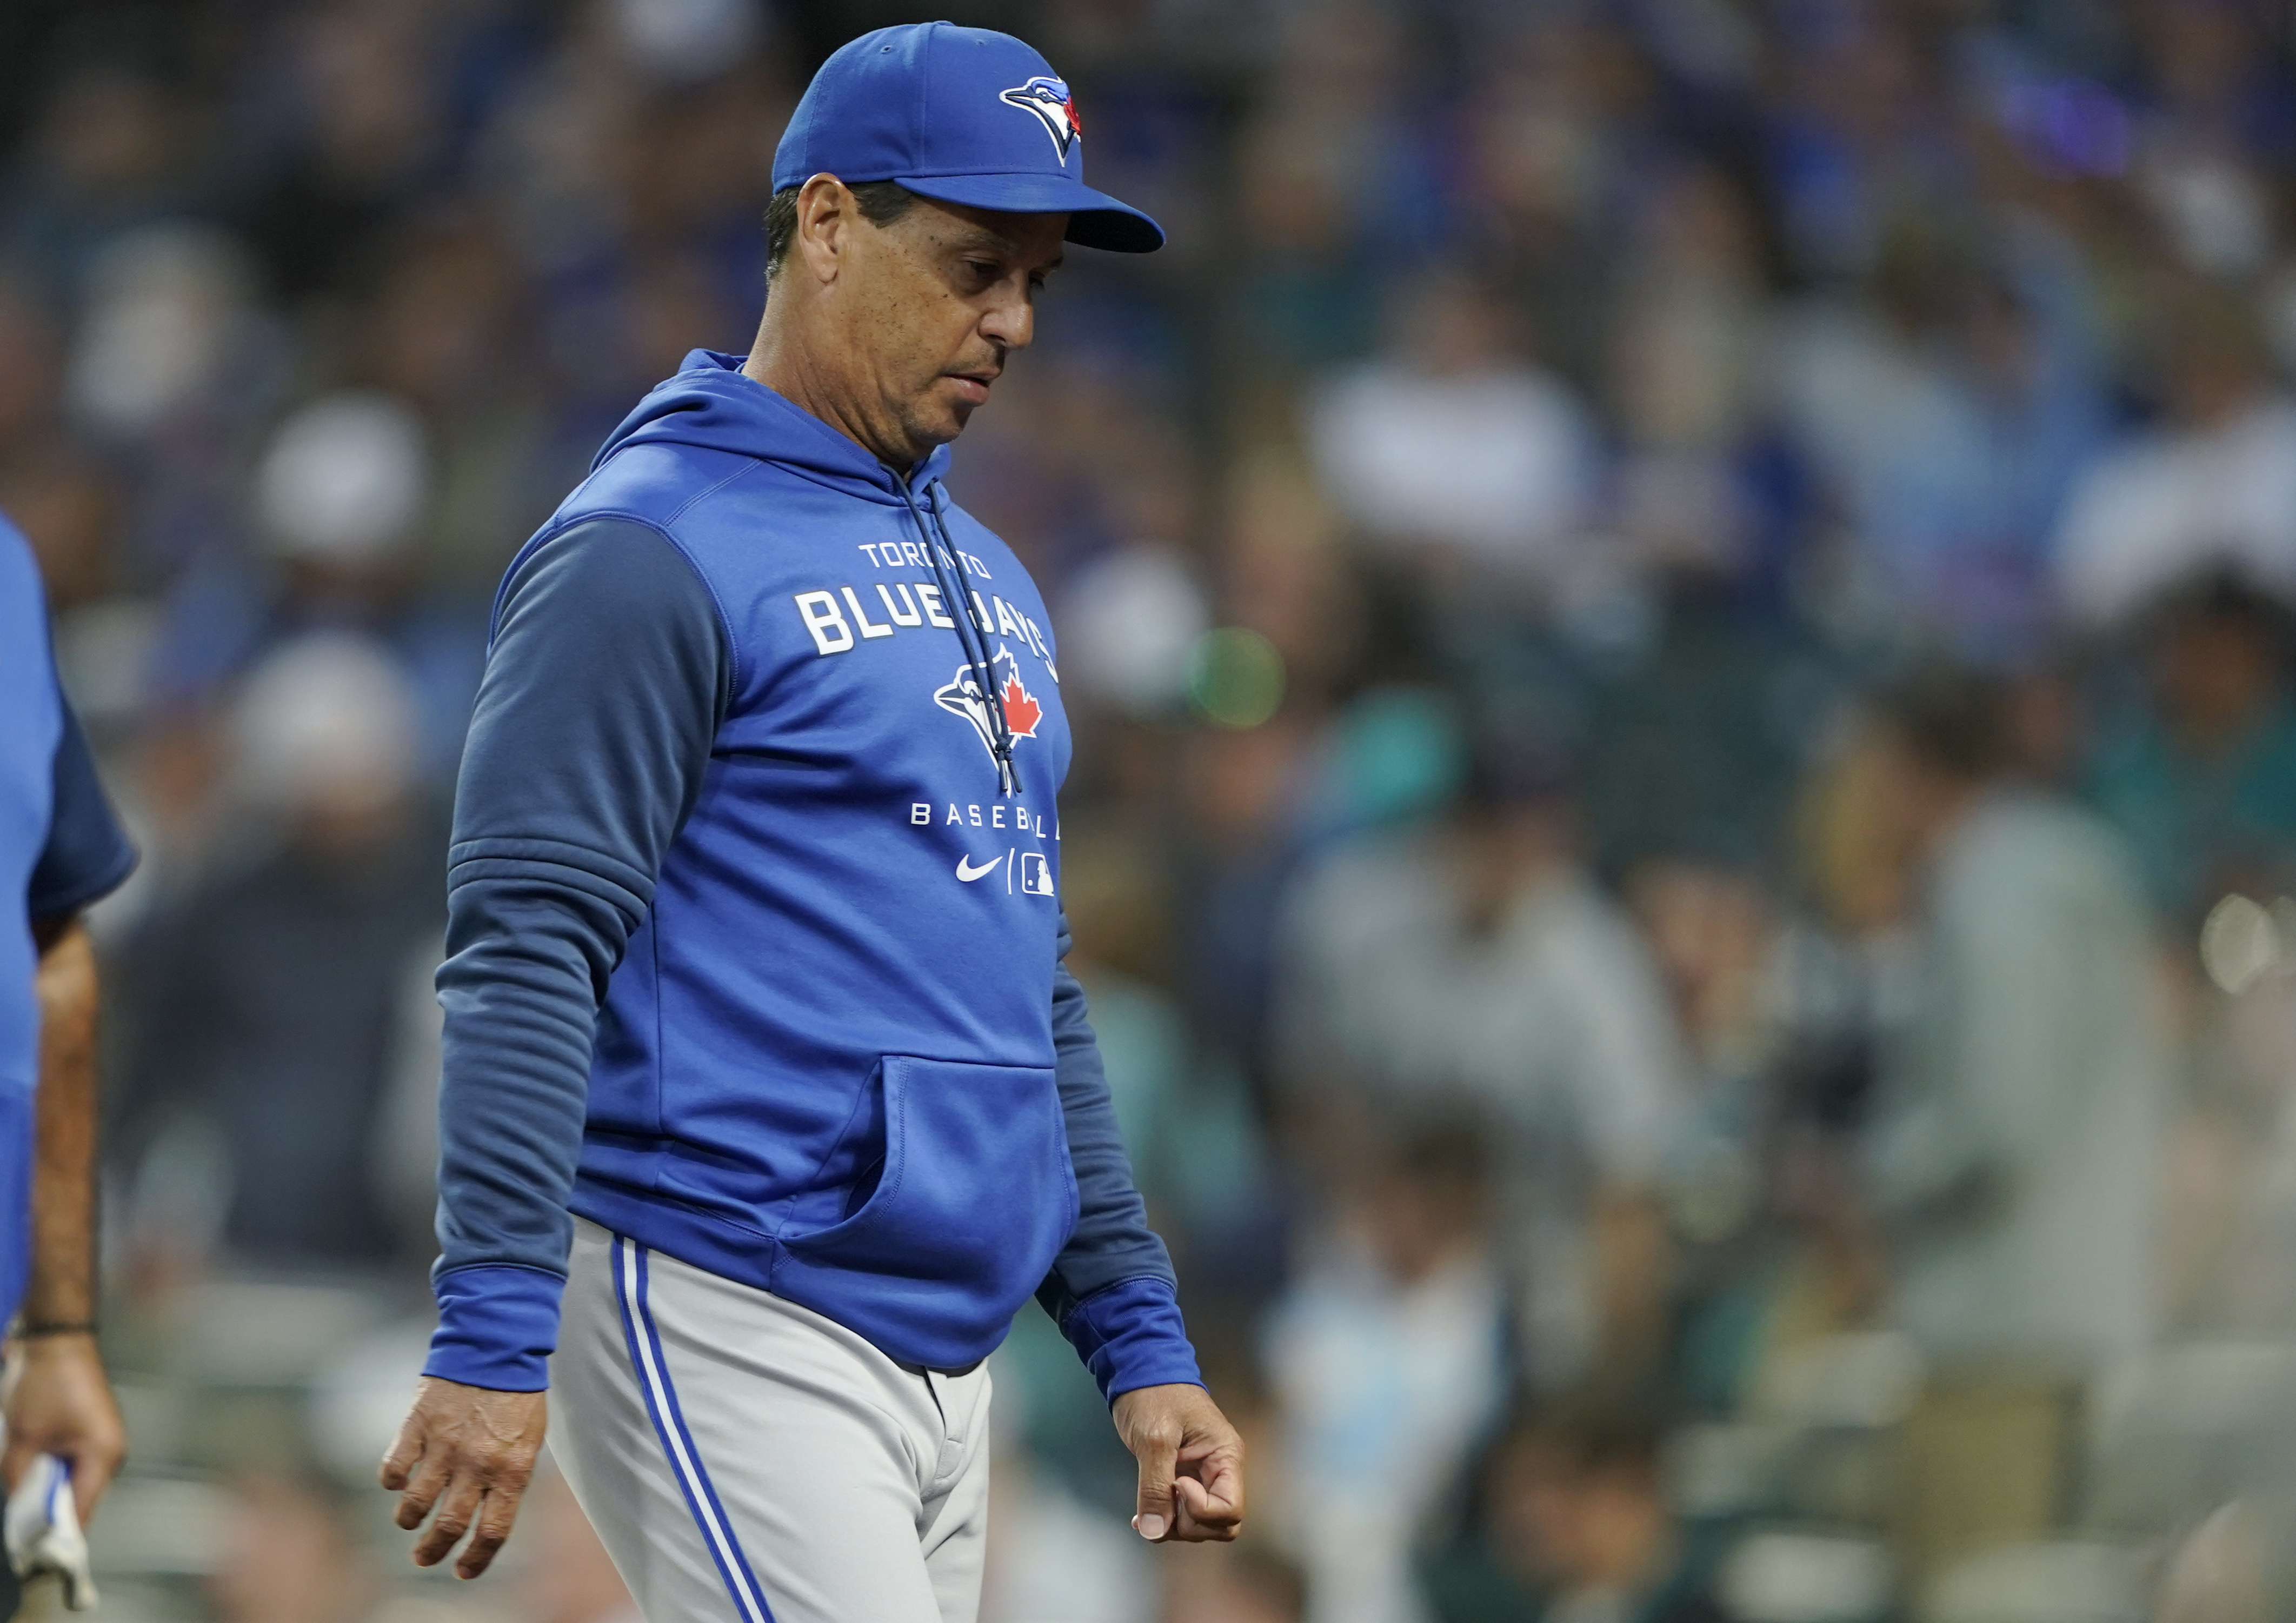 Toronto Blue Jays make Charlie Montoyo the 13th manager in their history -  Timmins News